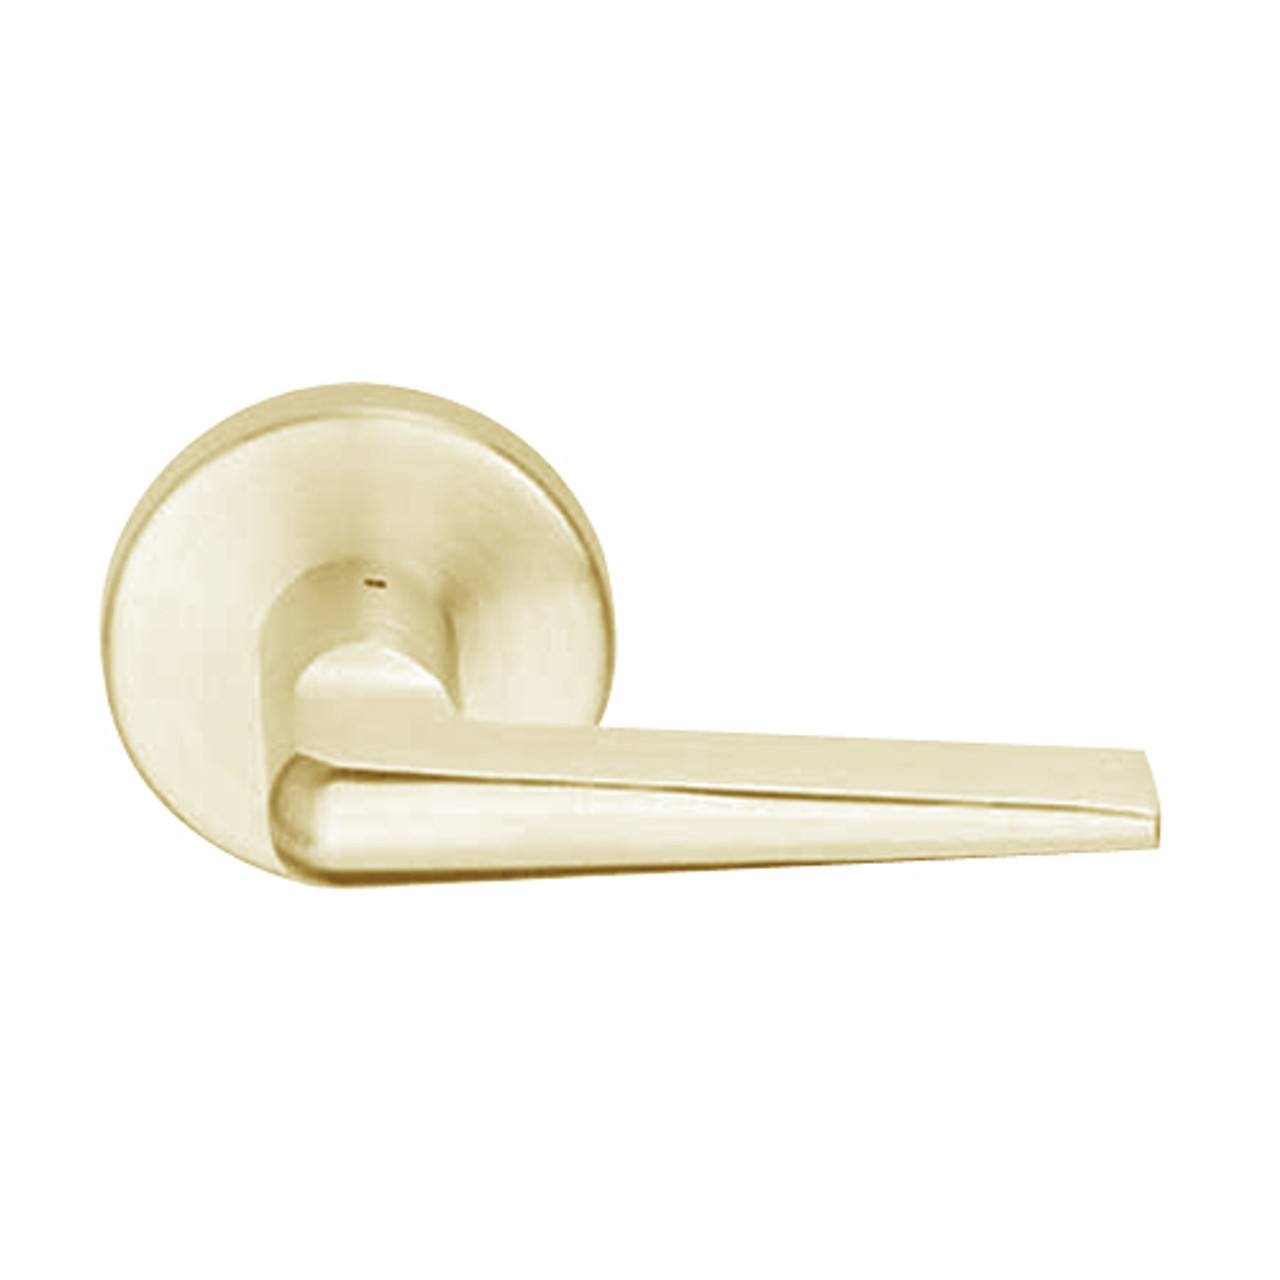 L9050R-05B-606 Schlage L Series Entrance Commercial Mortise Lock with 05 Cast Lever Design and Full Size Core in Satin Brass